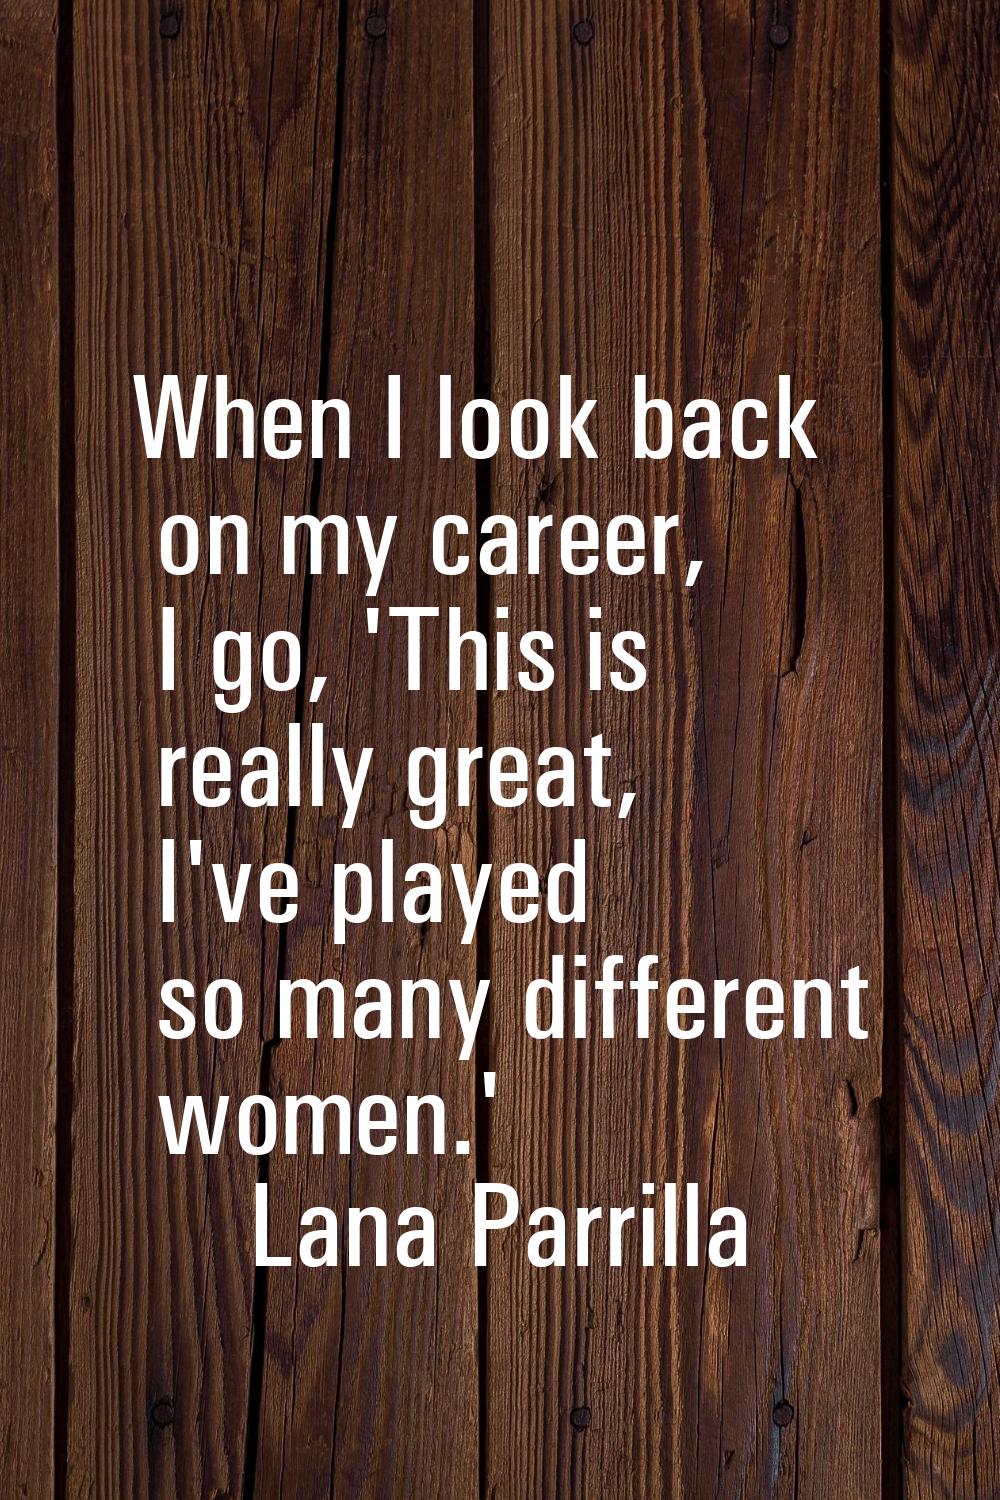 When I look back on my career, I go, 'This is really great, I've played so many different women.'